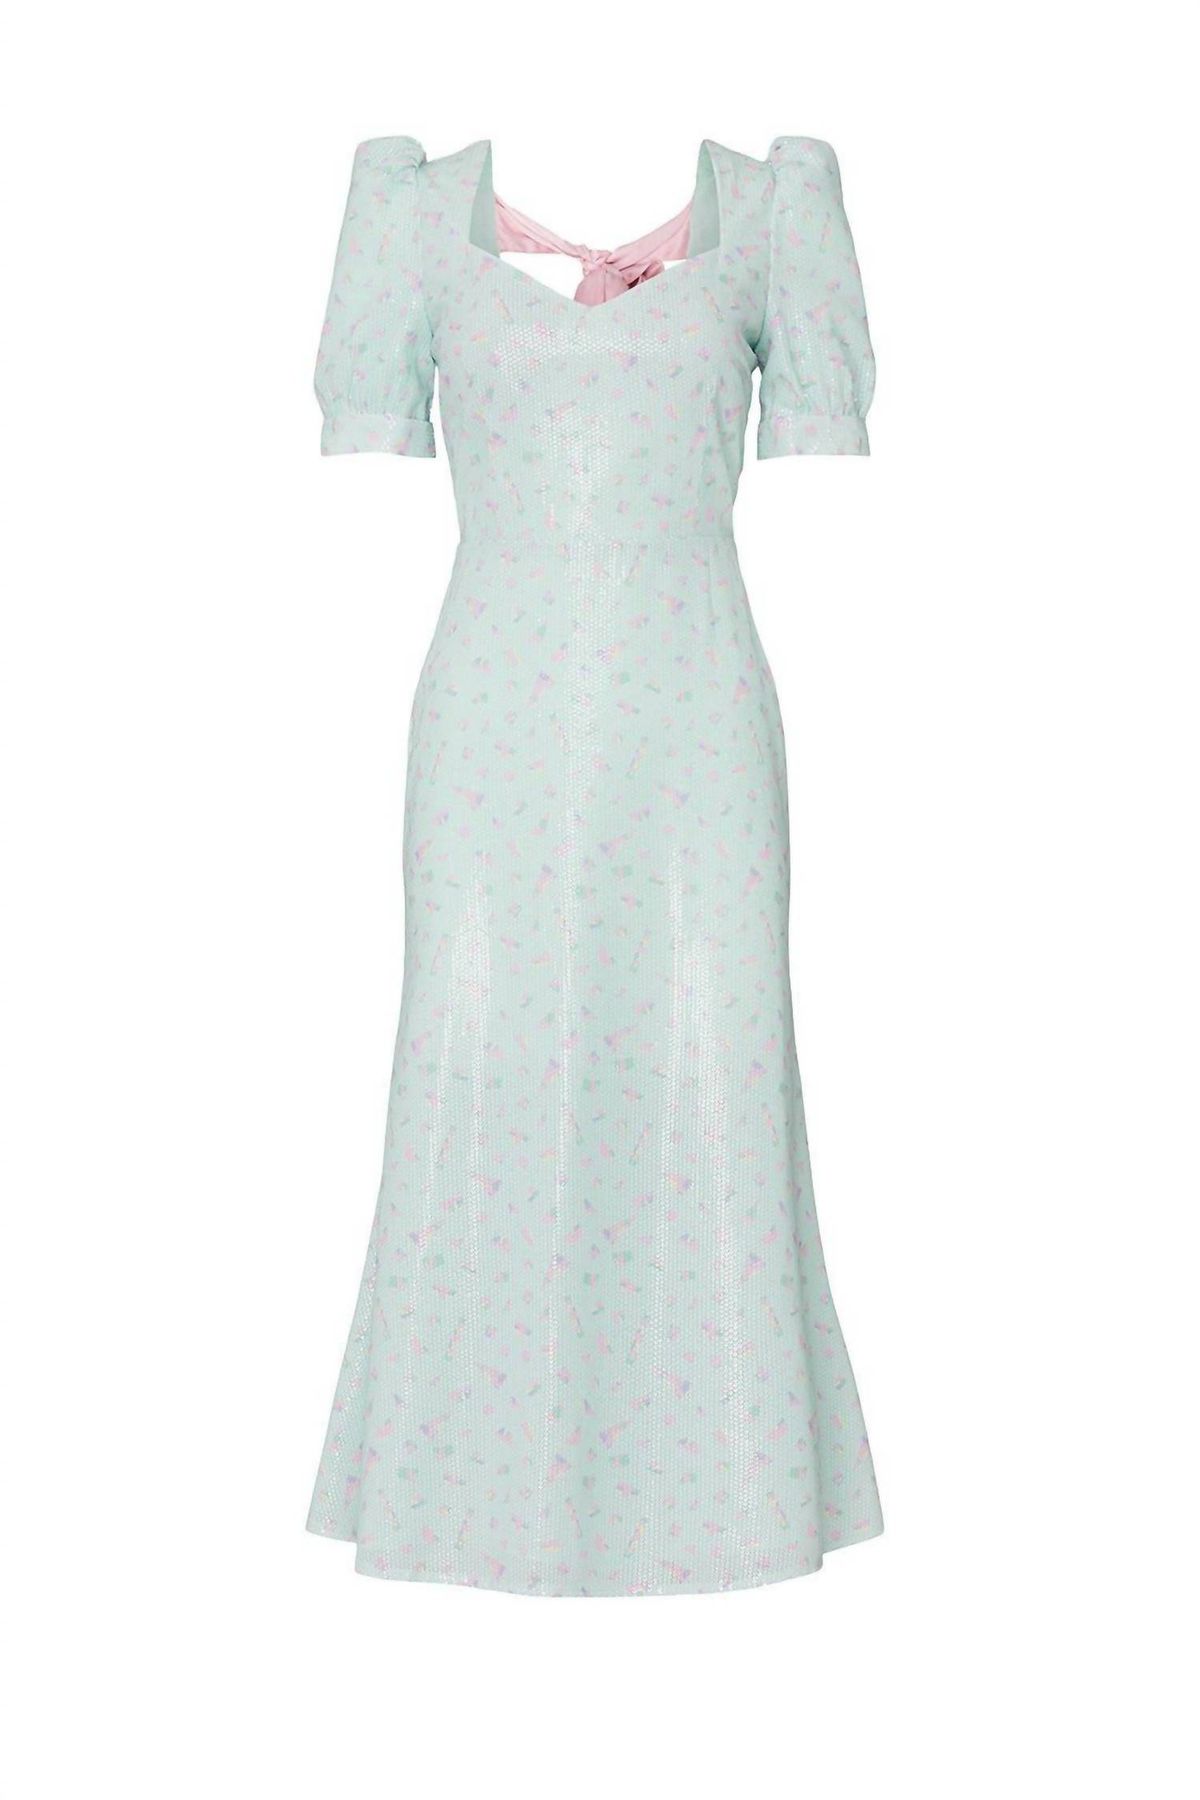 Style 1-1819459701-5651-1 Olivia Rubin Size 10 Light Green Cocktail Dress on Queenly